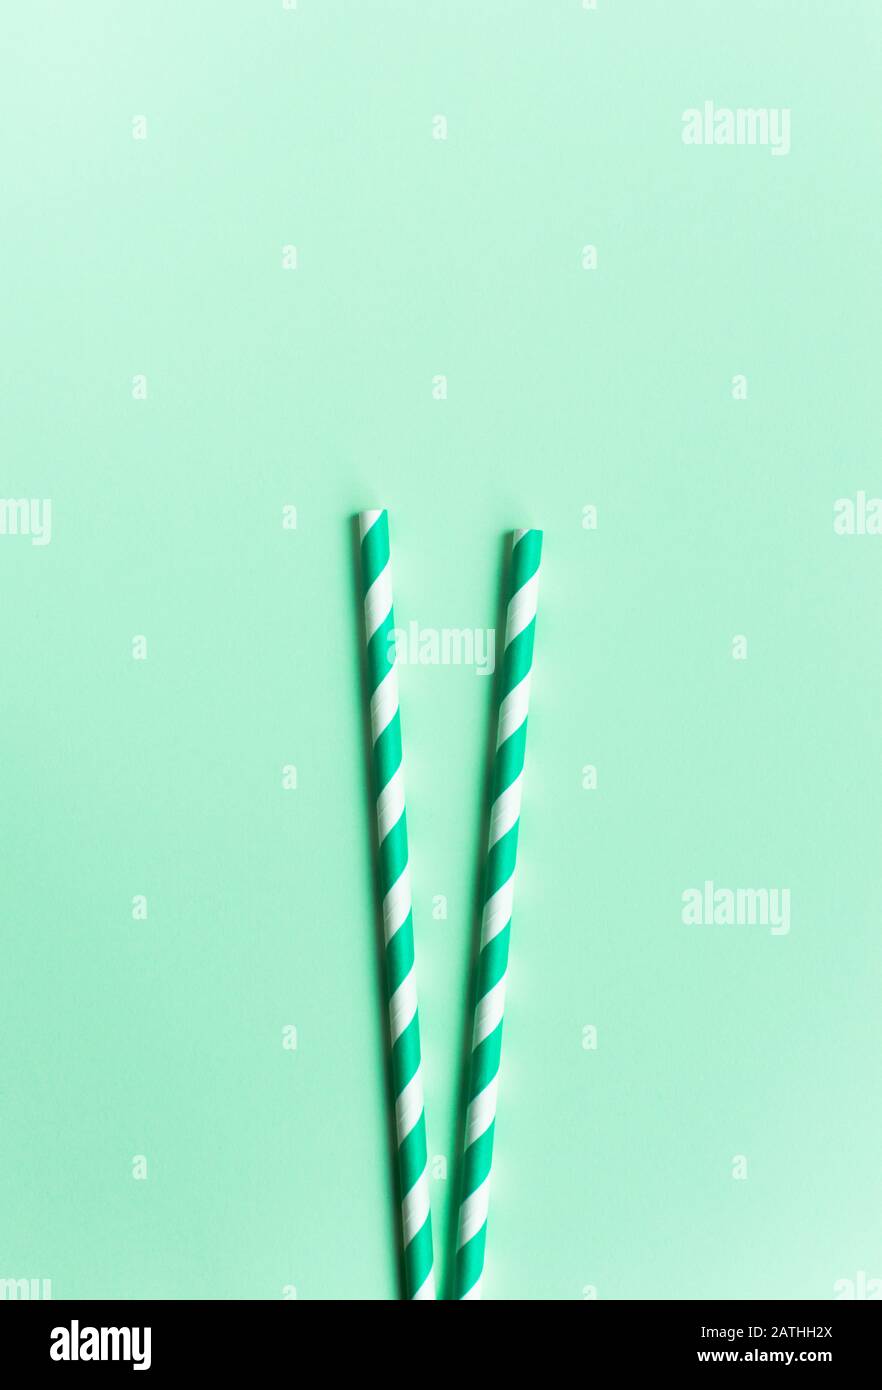 Green paper straws on a green background Stock Photo